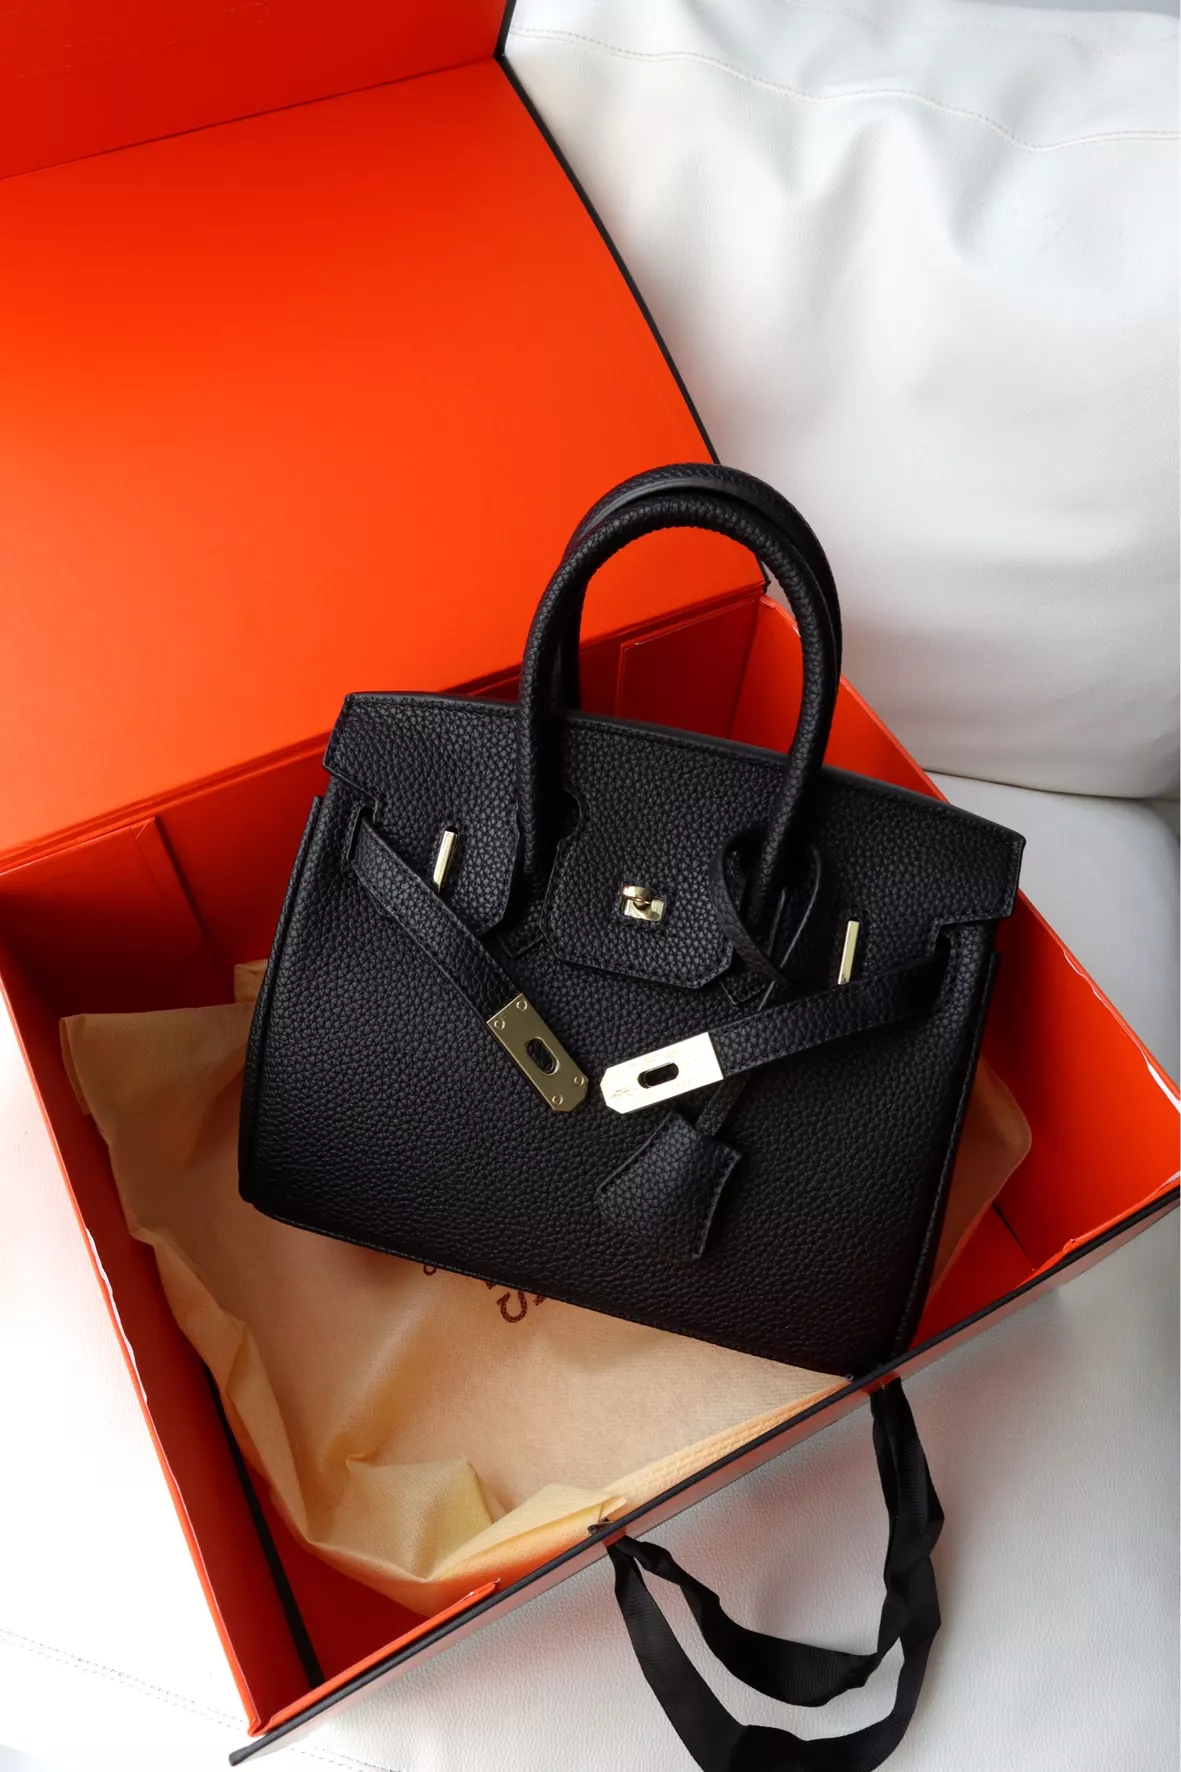 UNBOXING FAKE HERMES KELLY BAG from ALIEXPRESS